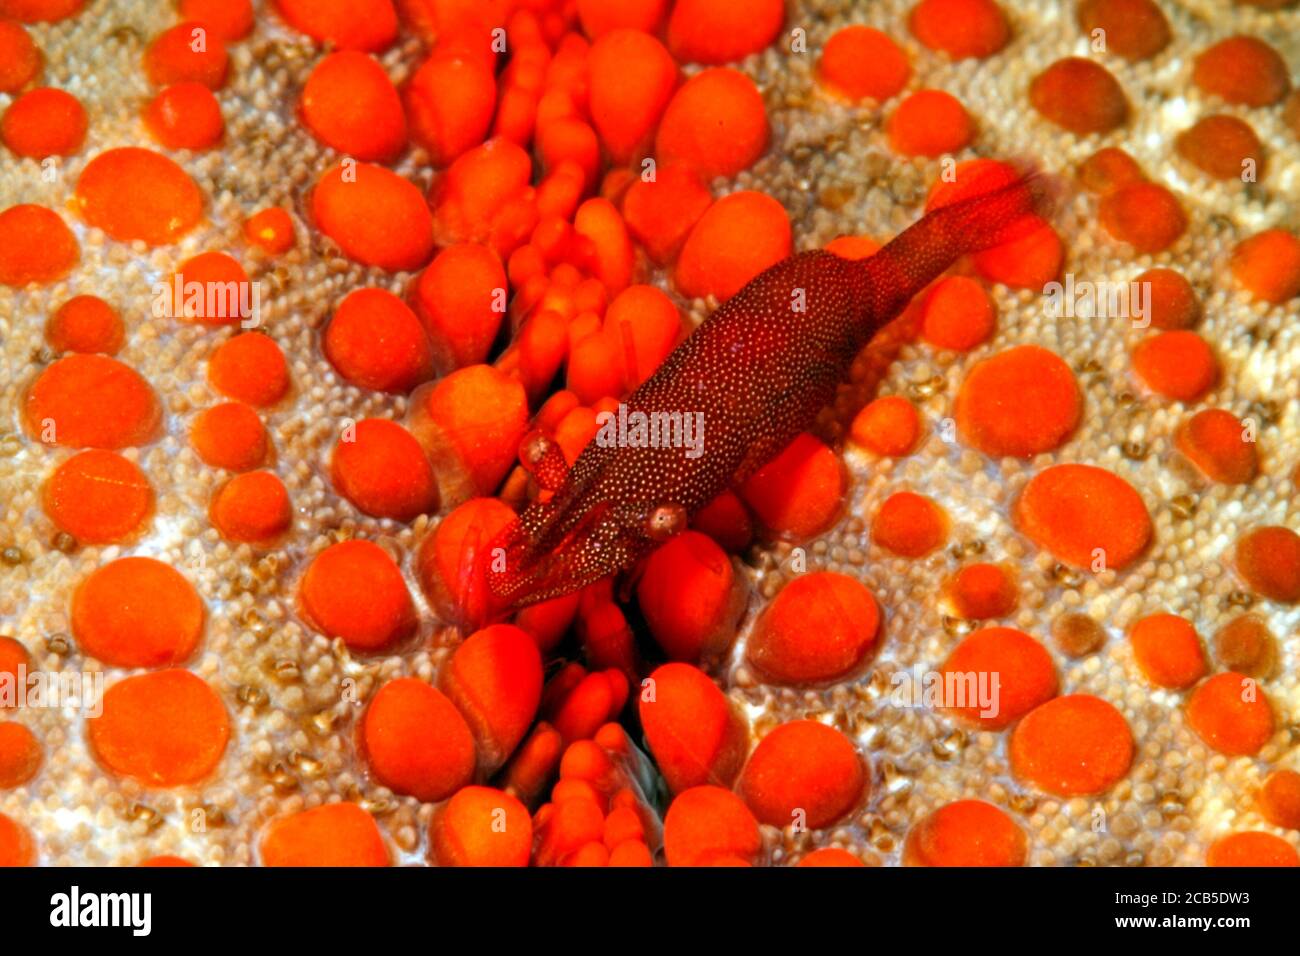 Commensal Shrimp,Zenopontonia soror. Previously described as Periclimenes soror. Shrimp is commensal on sea stars, and takes the color of the host. Stock Photo